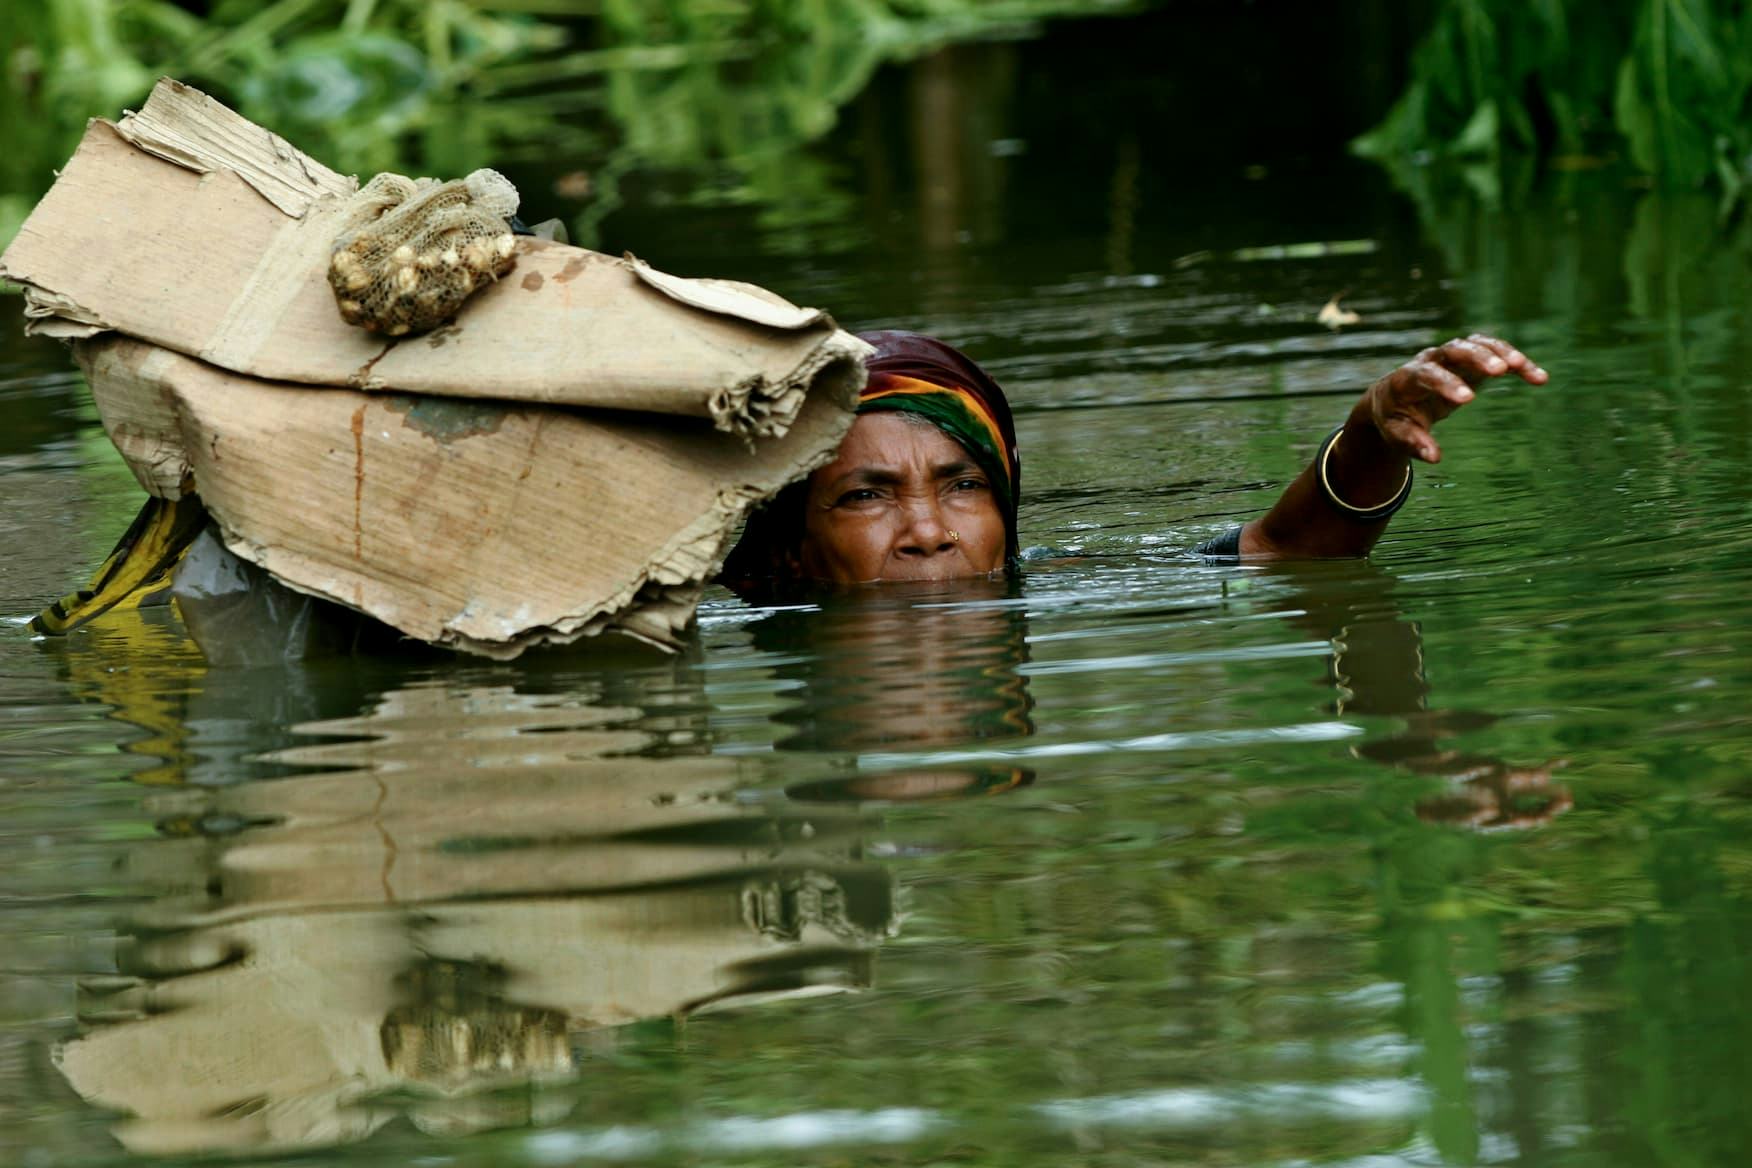 A flood victim wades through deep water as she has managed to salvage the daily cooking essentials from her home which has already gone under water. Sariakandi, Bogra, Bangladesh